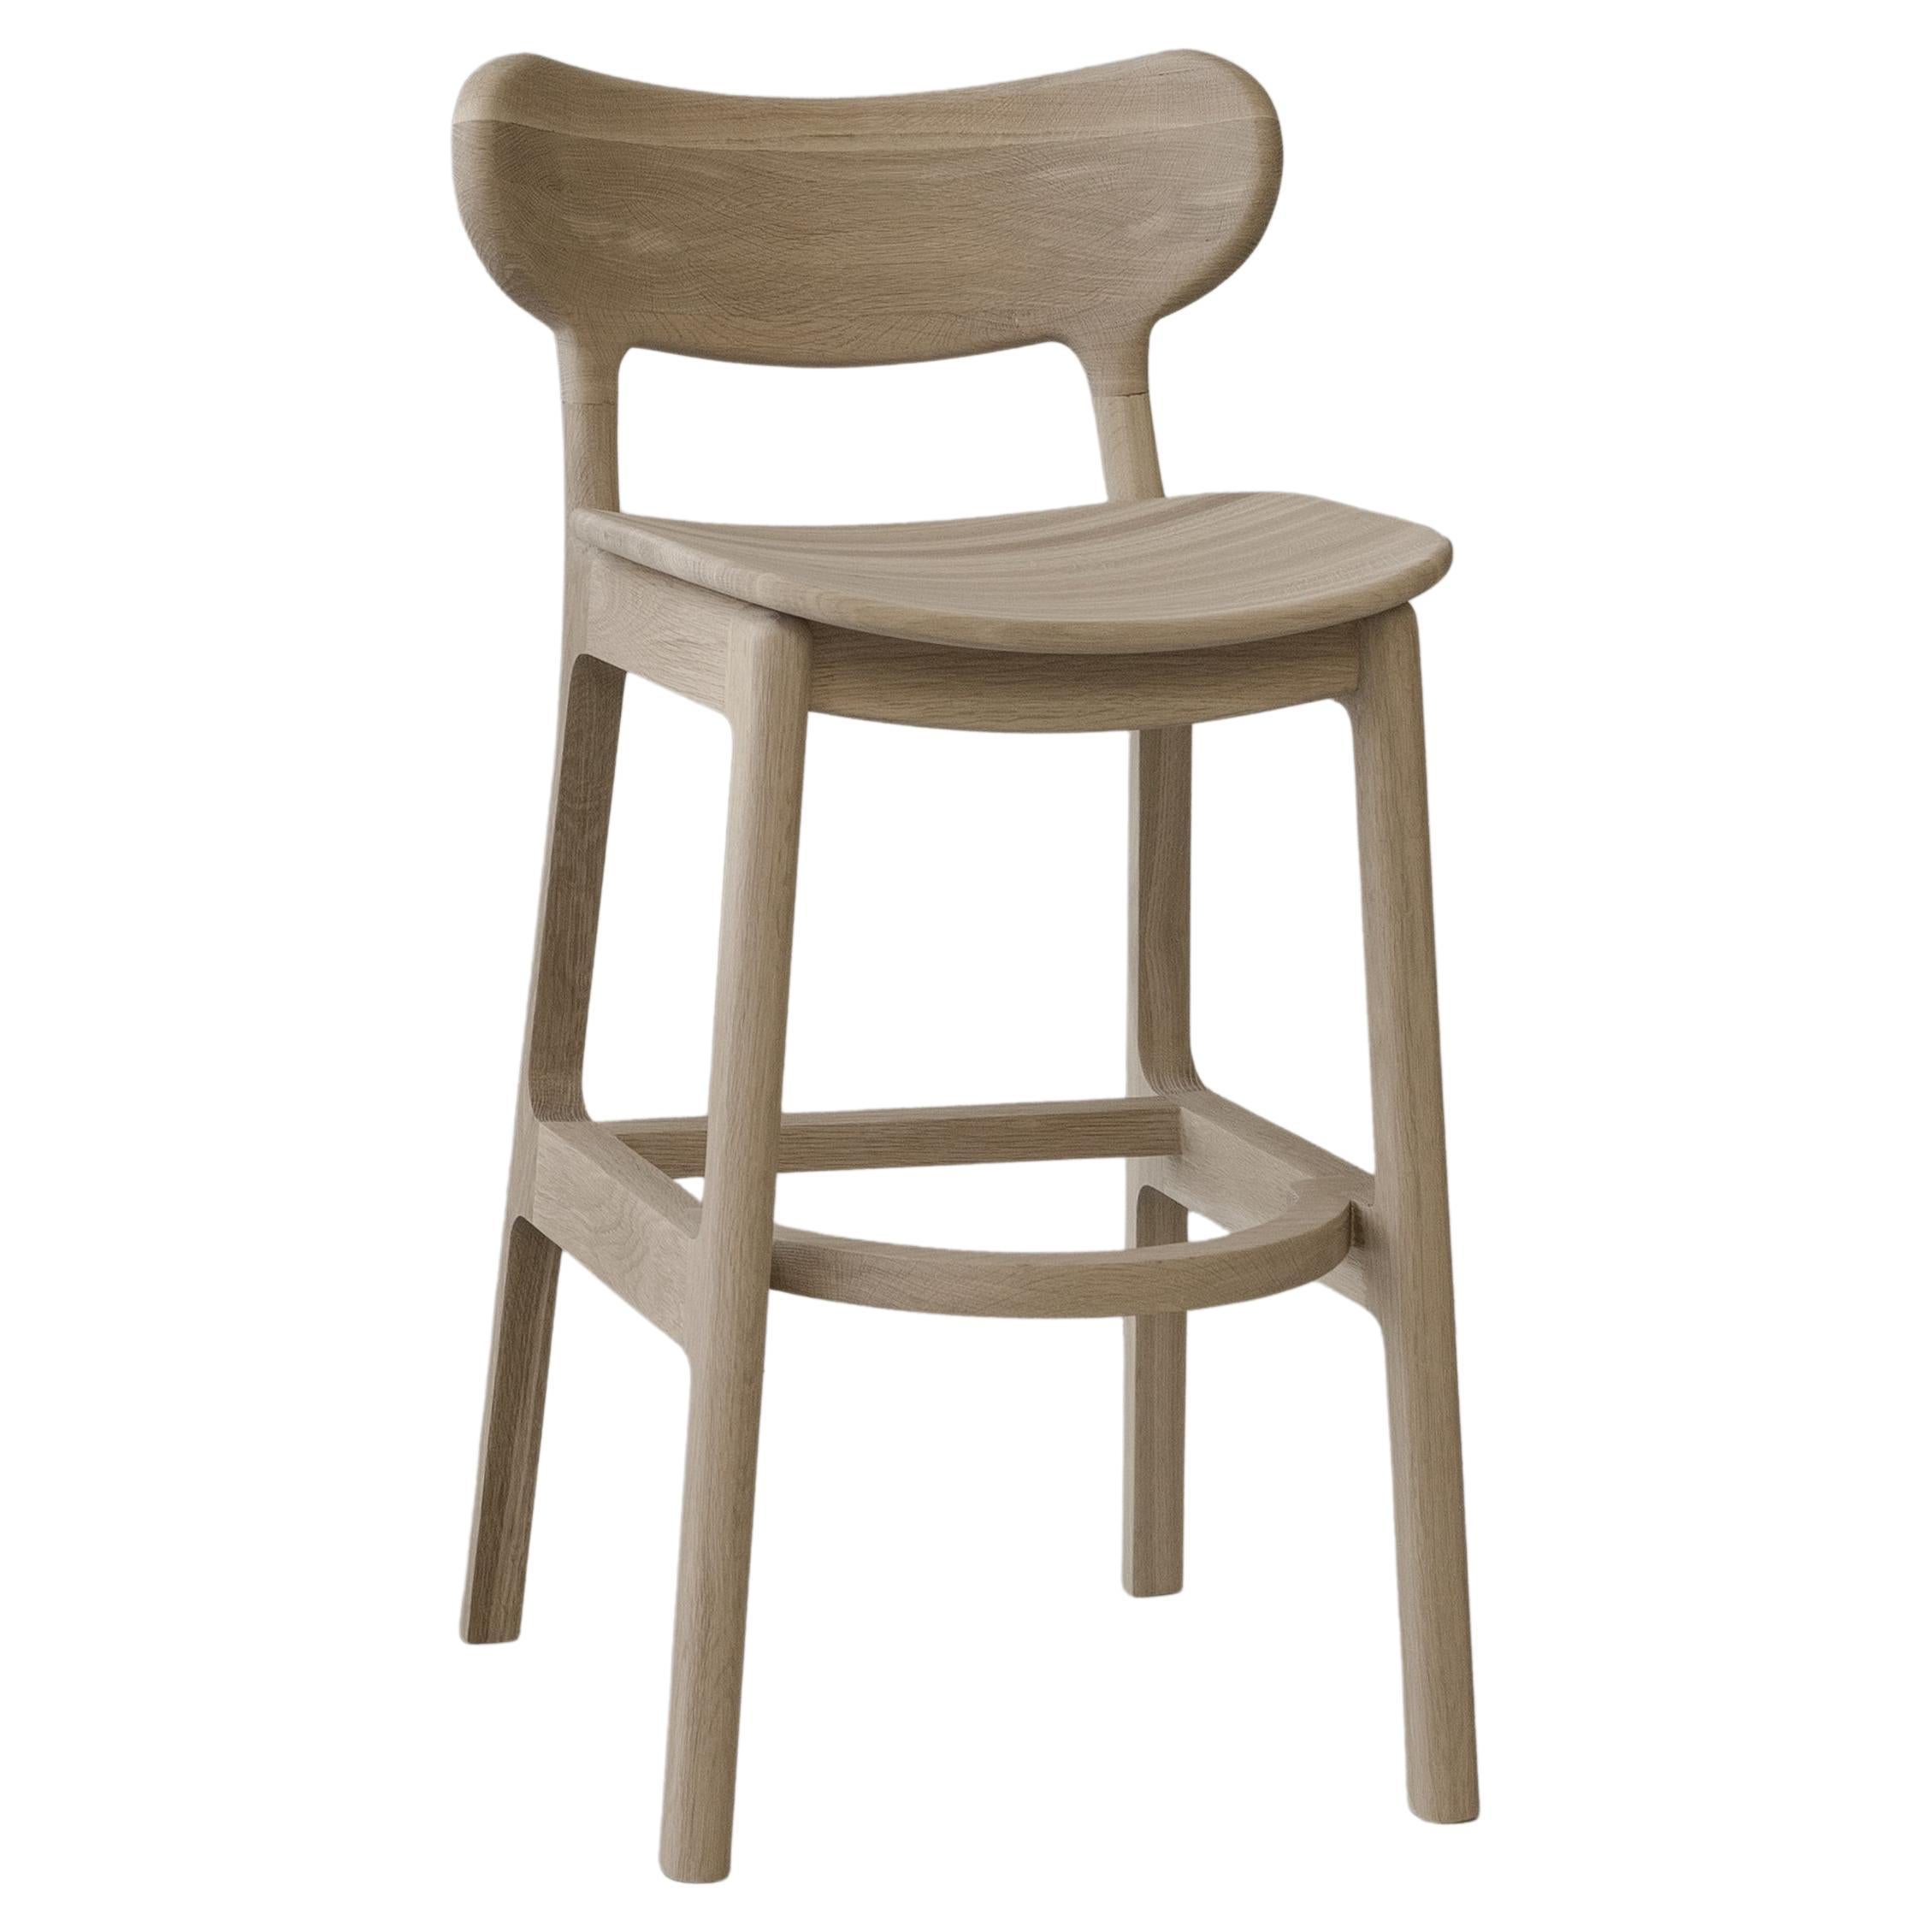 Trasiego Tall Chair For Sale